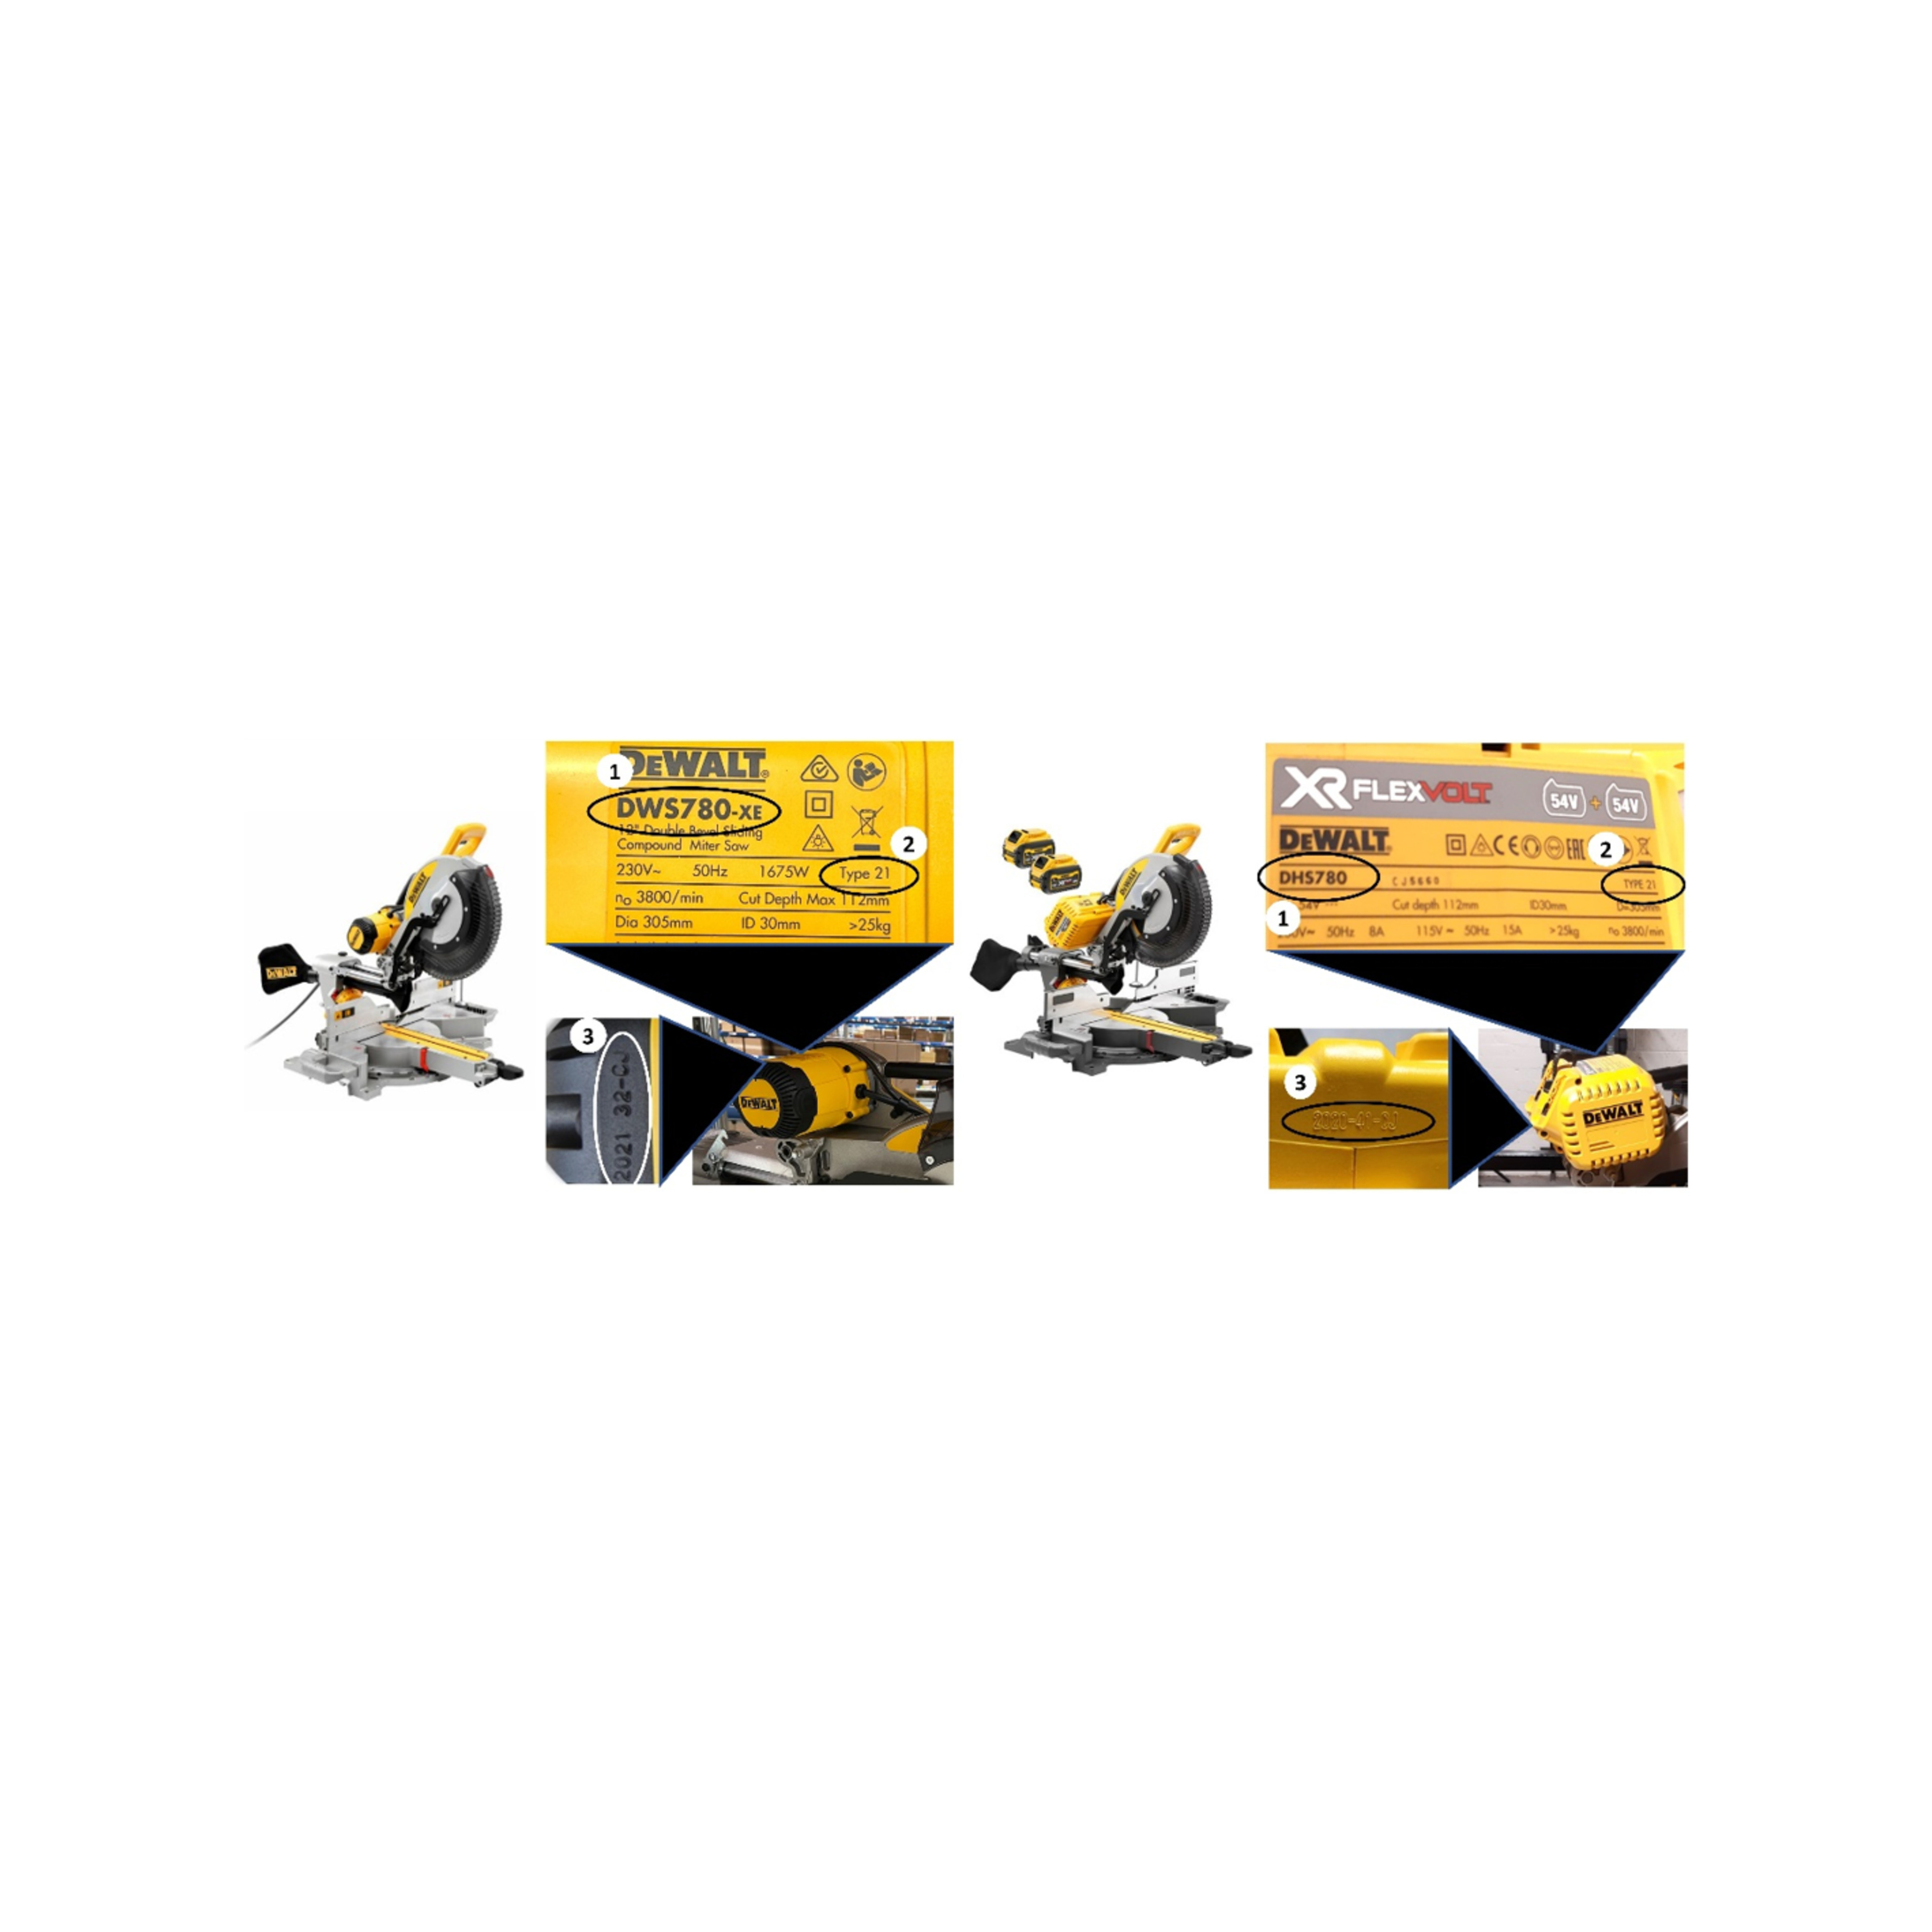 Picture of DeWalt saw models and marking of how to find the recall 